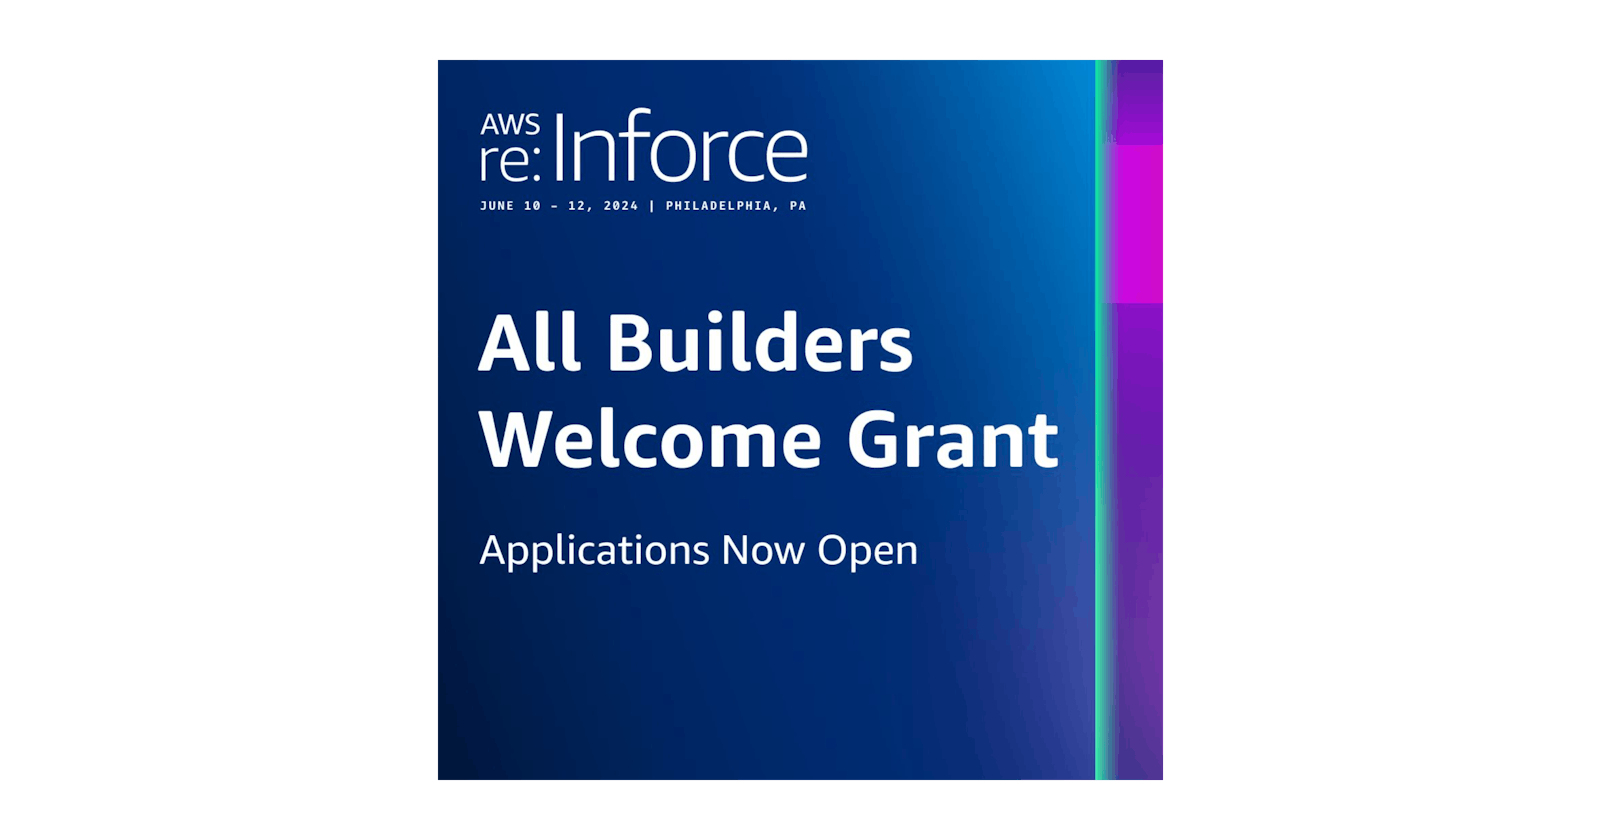 All Builder's Welcome Grant for AWS re:Inforce This Summer in Philly (Closes April 1st)